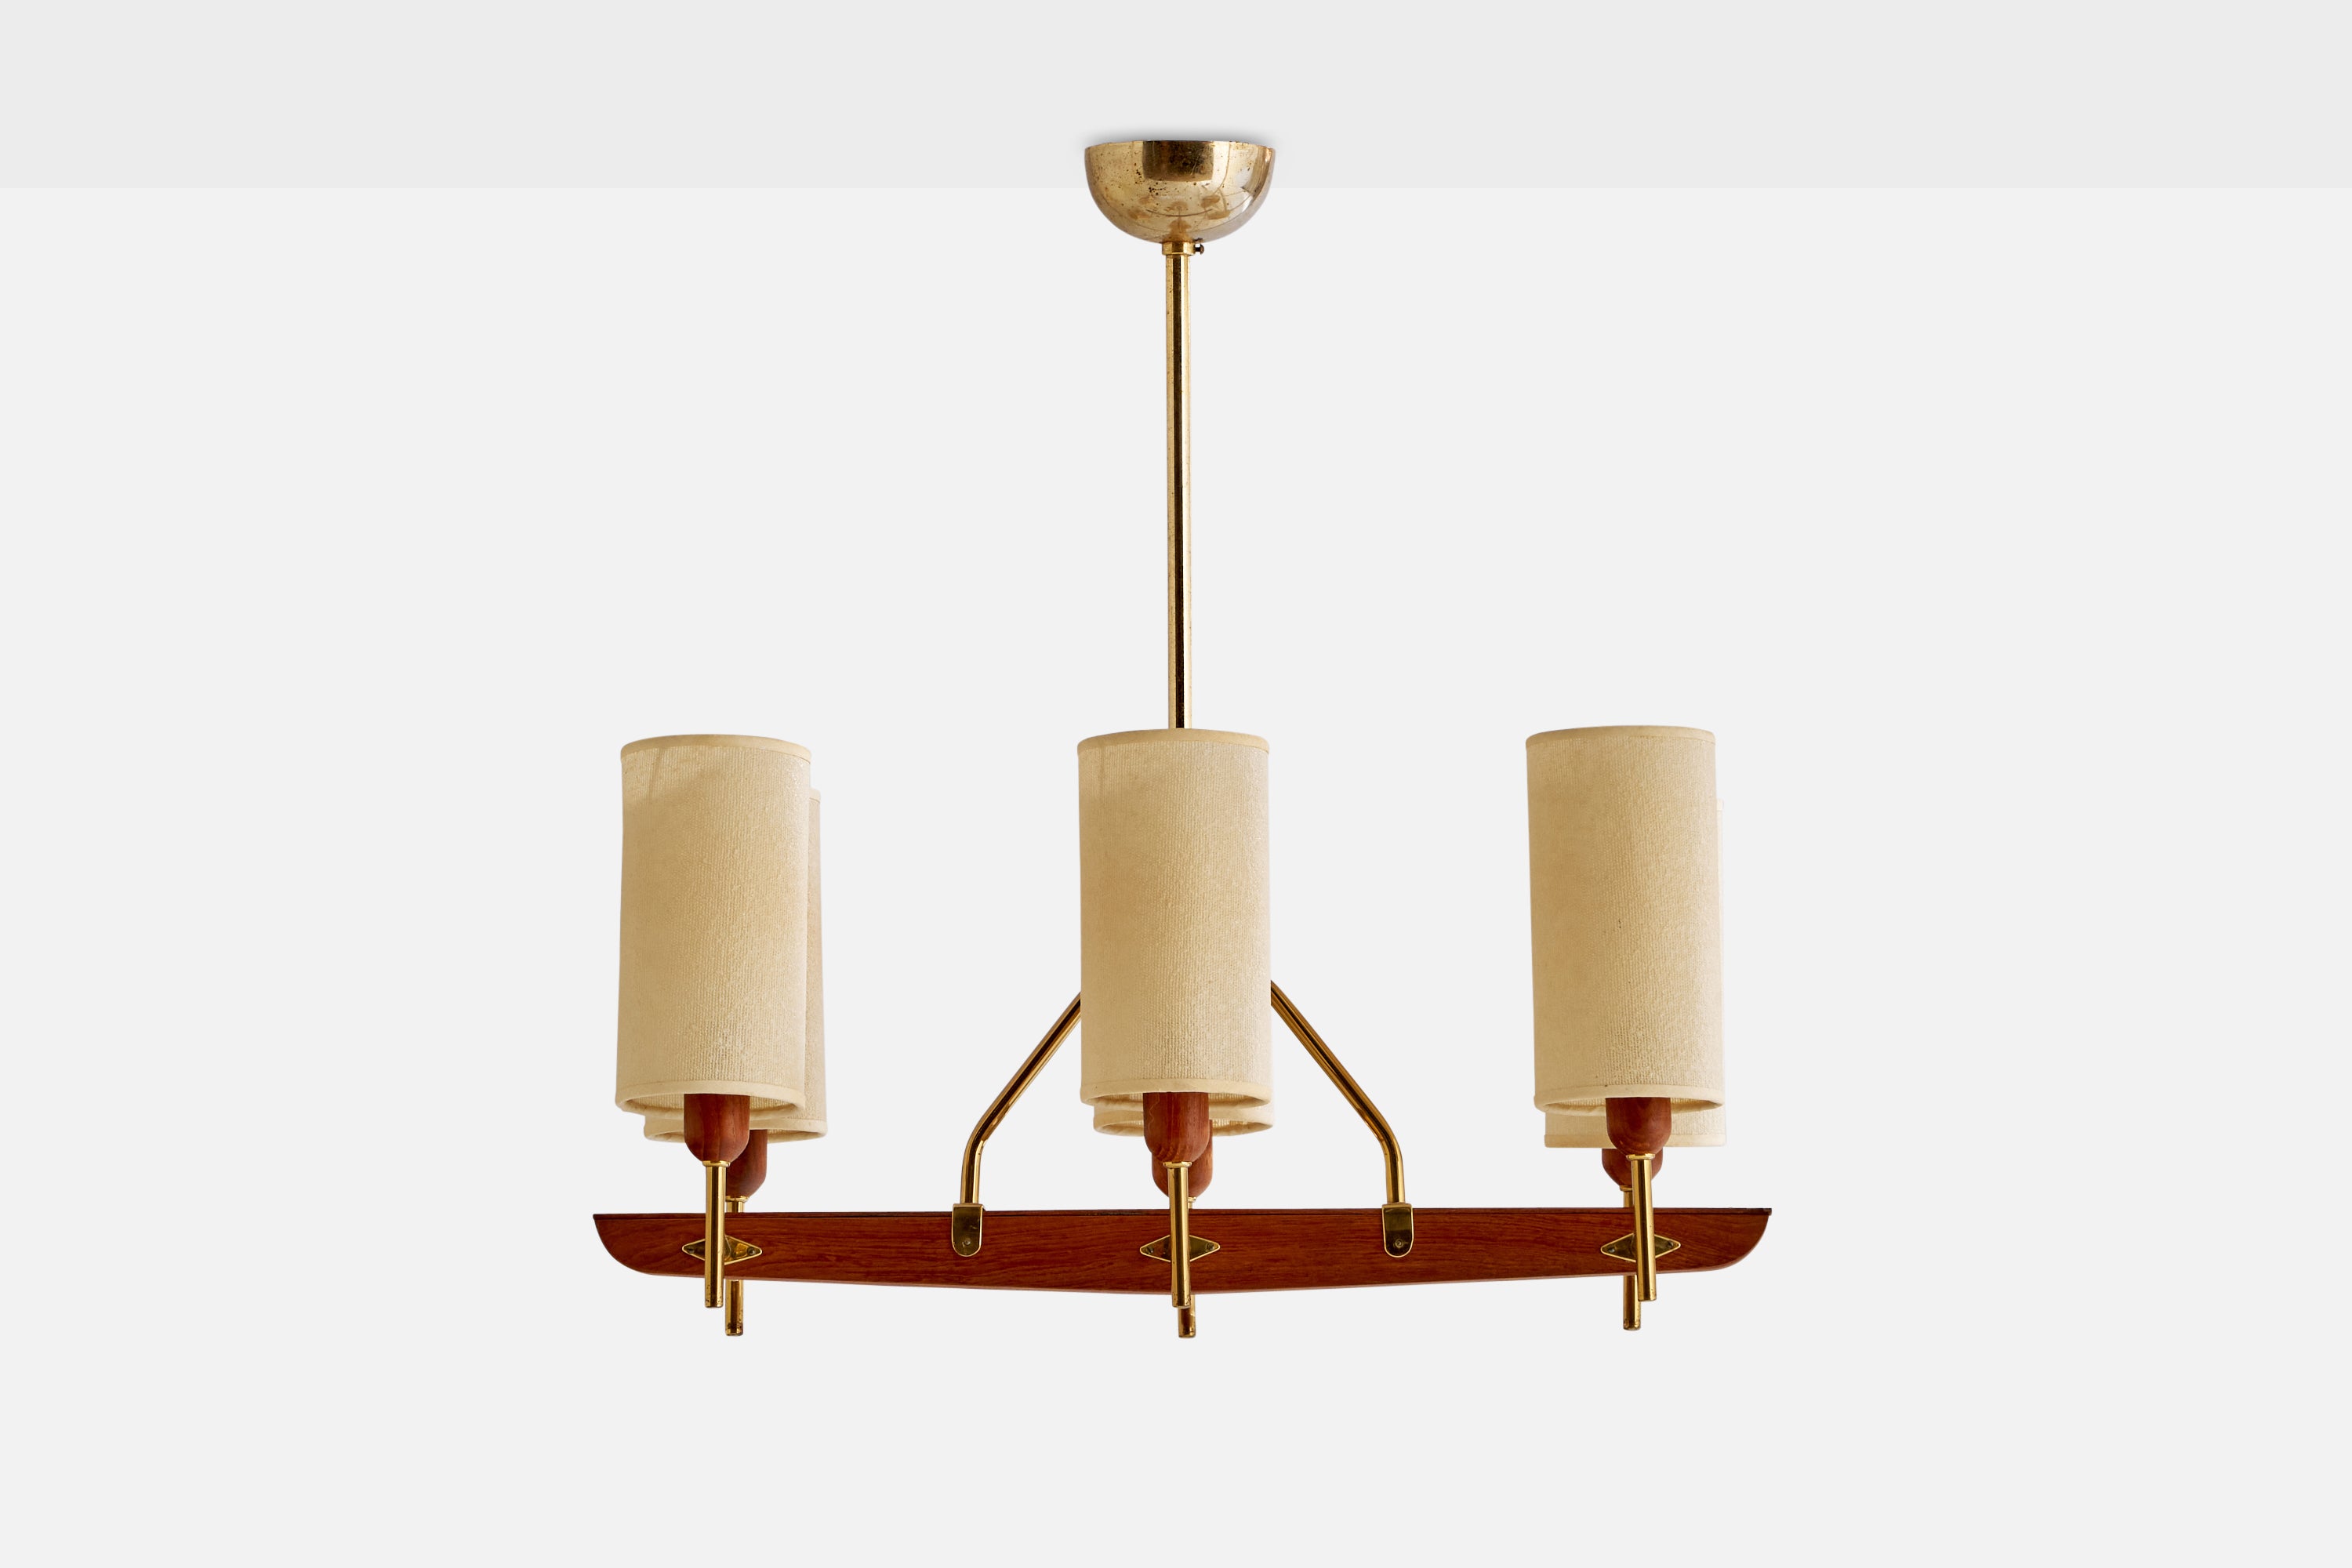 A brass, off-white fabric and teak chandelier designed and produced by Hans-Agne Jakobsson, Sweden, 1950s.

Dimensions of canopy (inches): 2” H x 3.7”  Diameter
Socket takes standard E-14 bulbs. 6 sockets.There is no maximum wattage stated on the